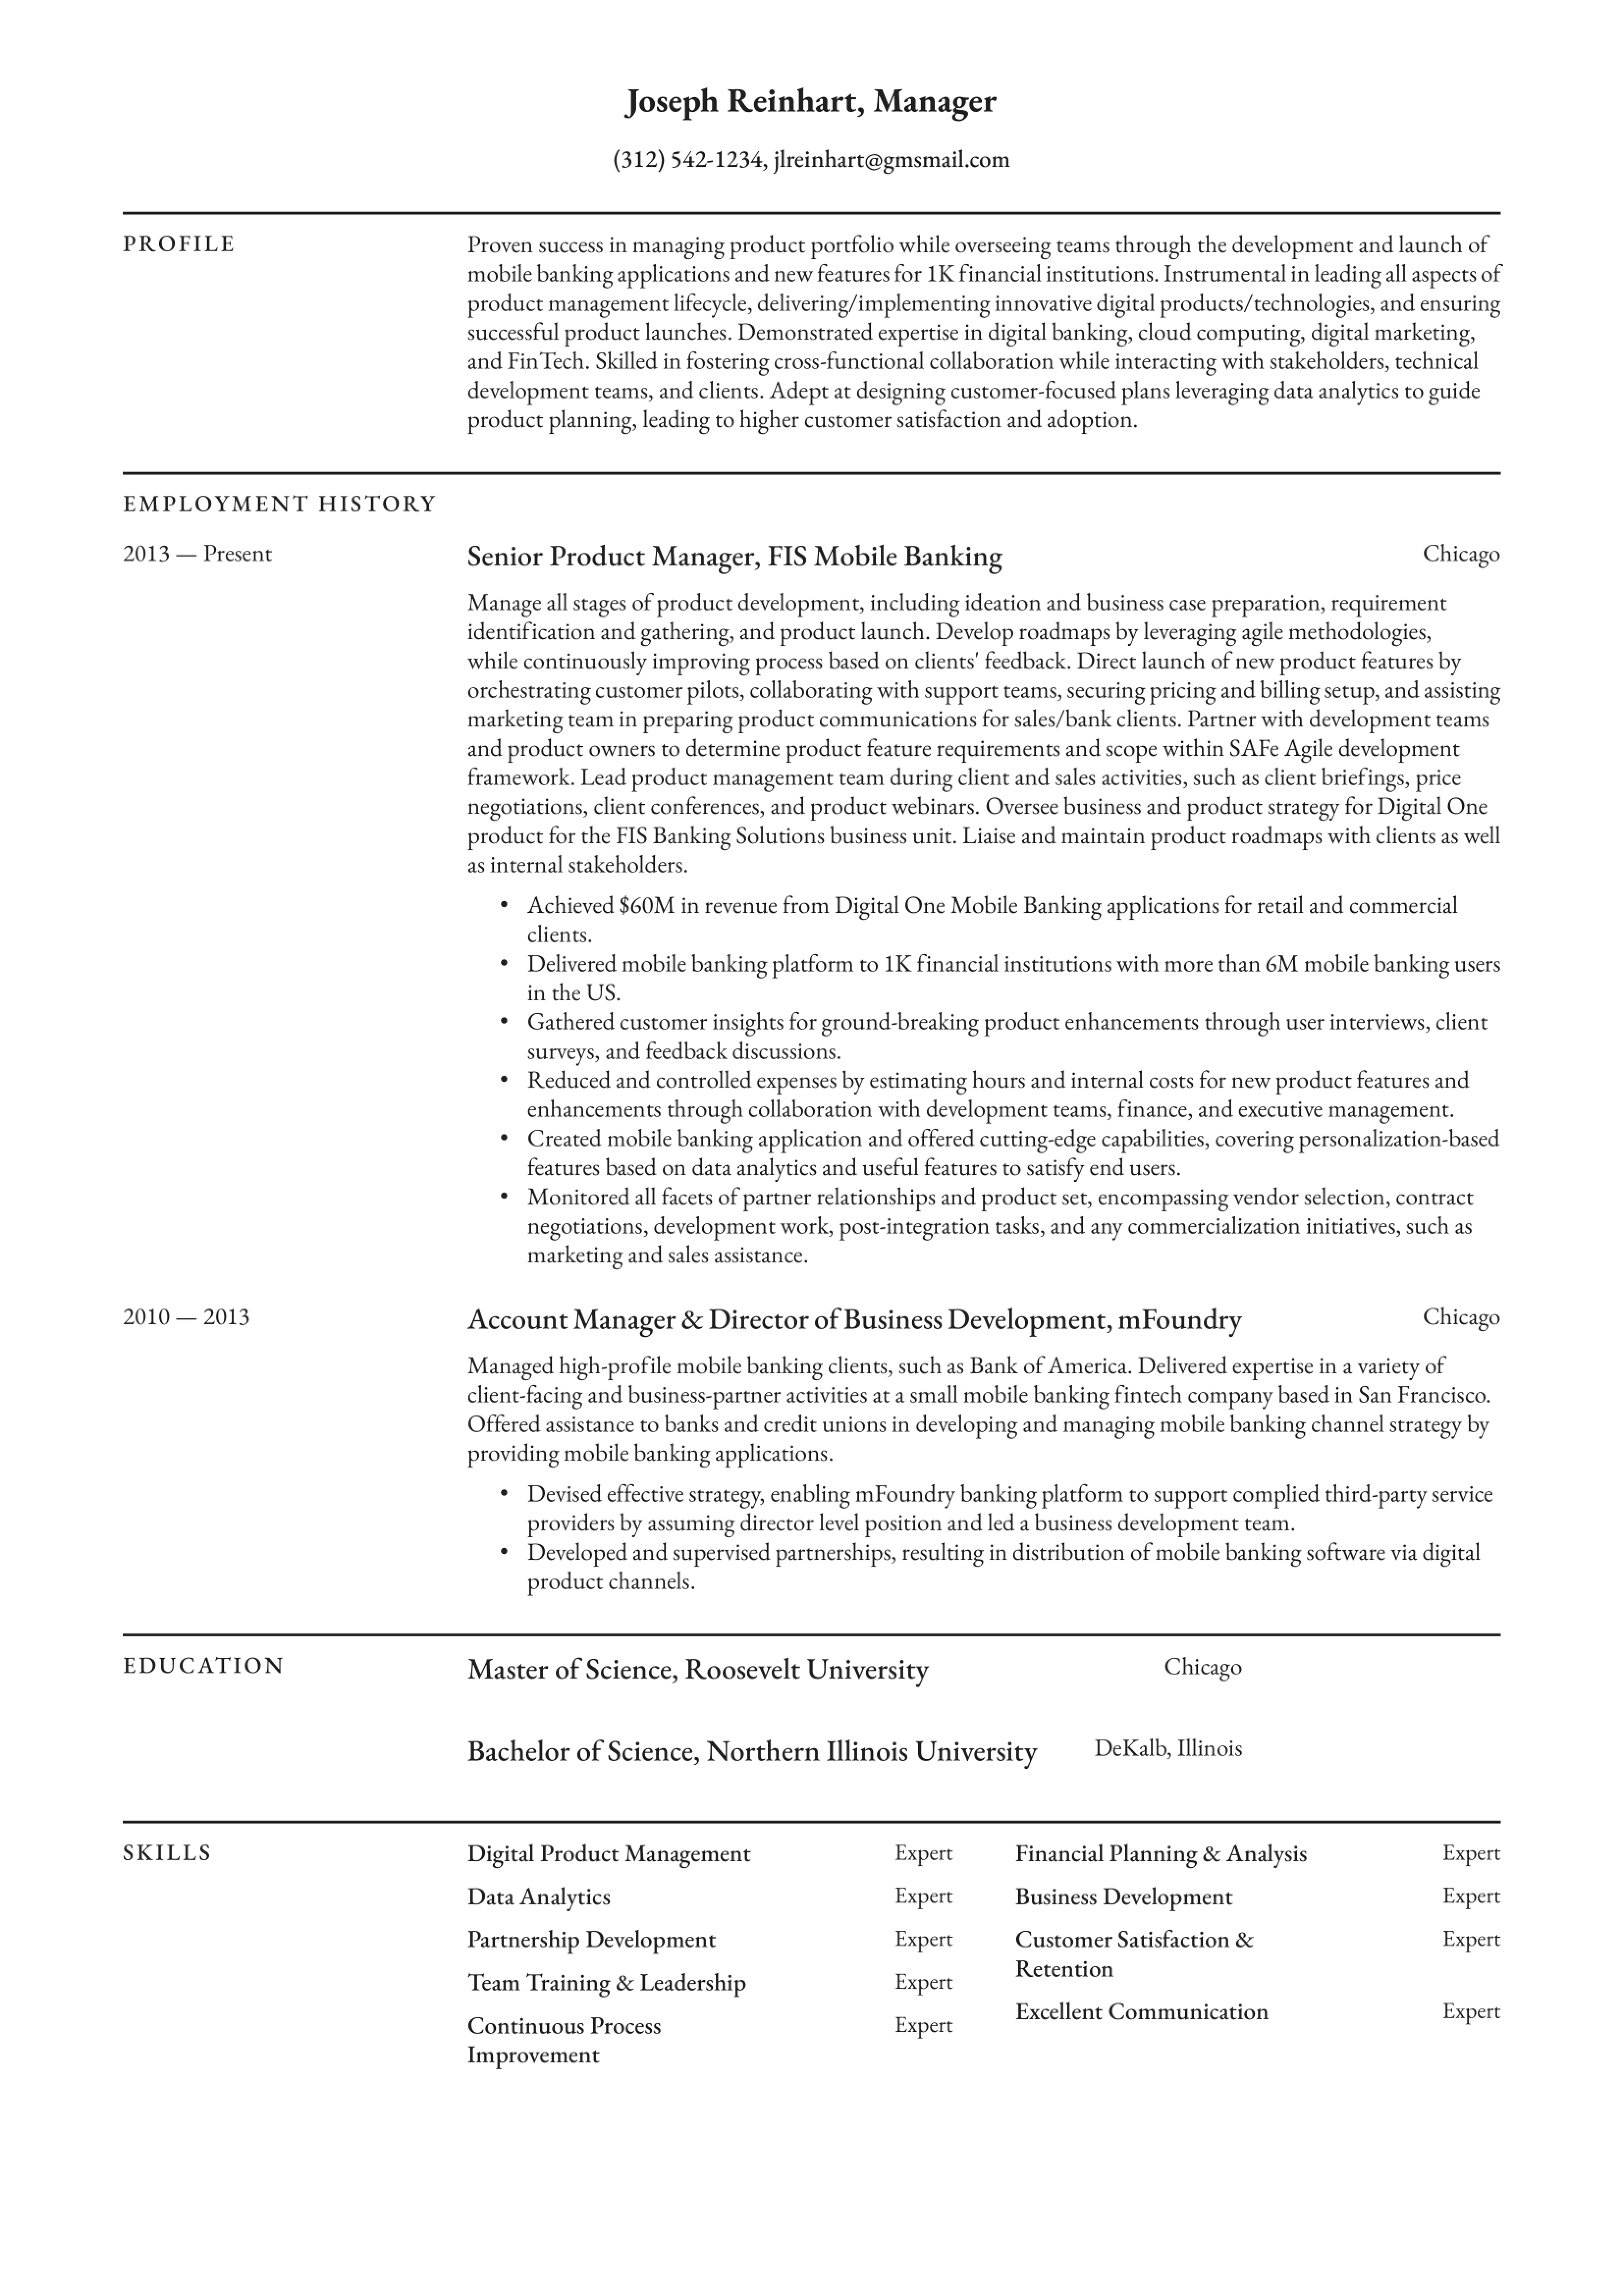 Manager Resume Example 